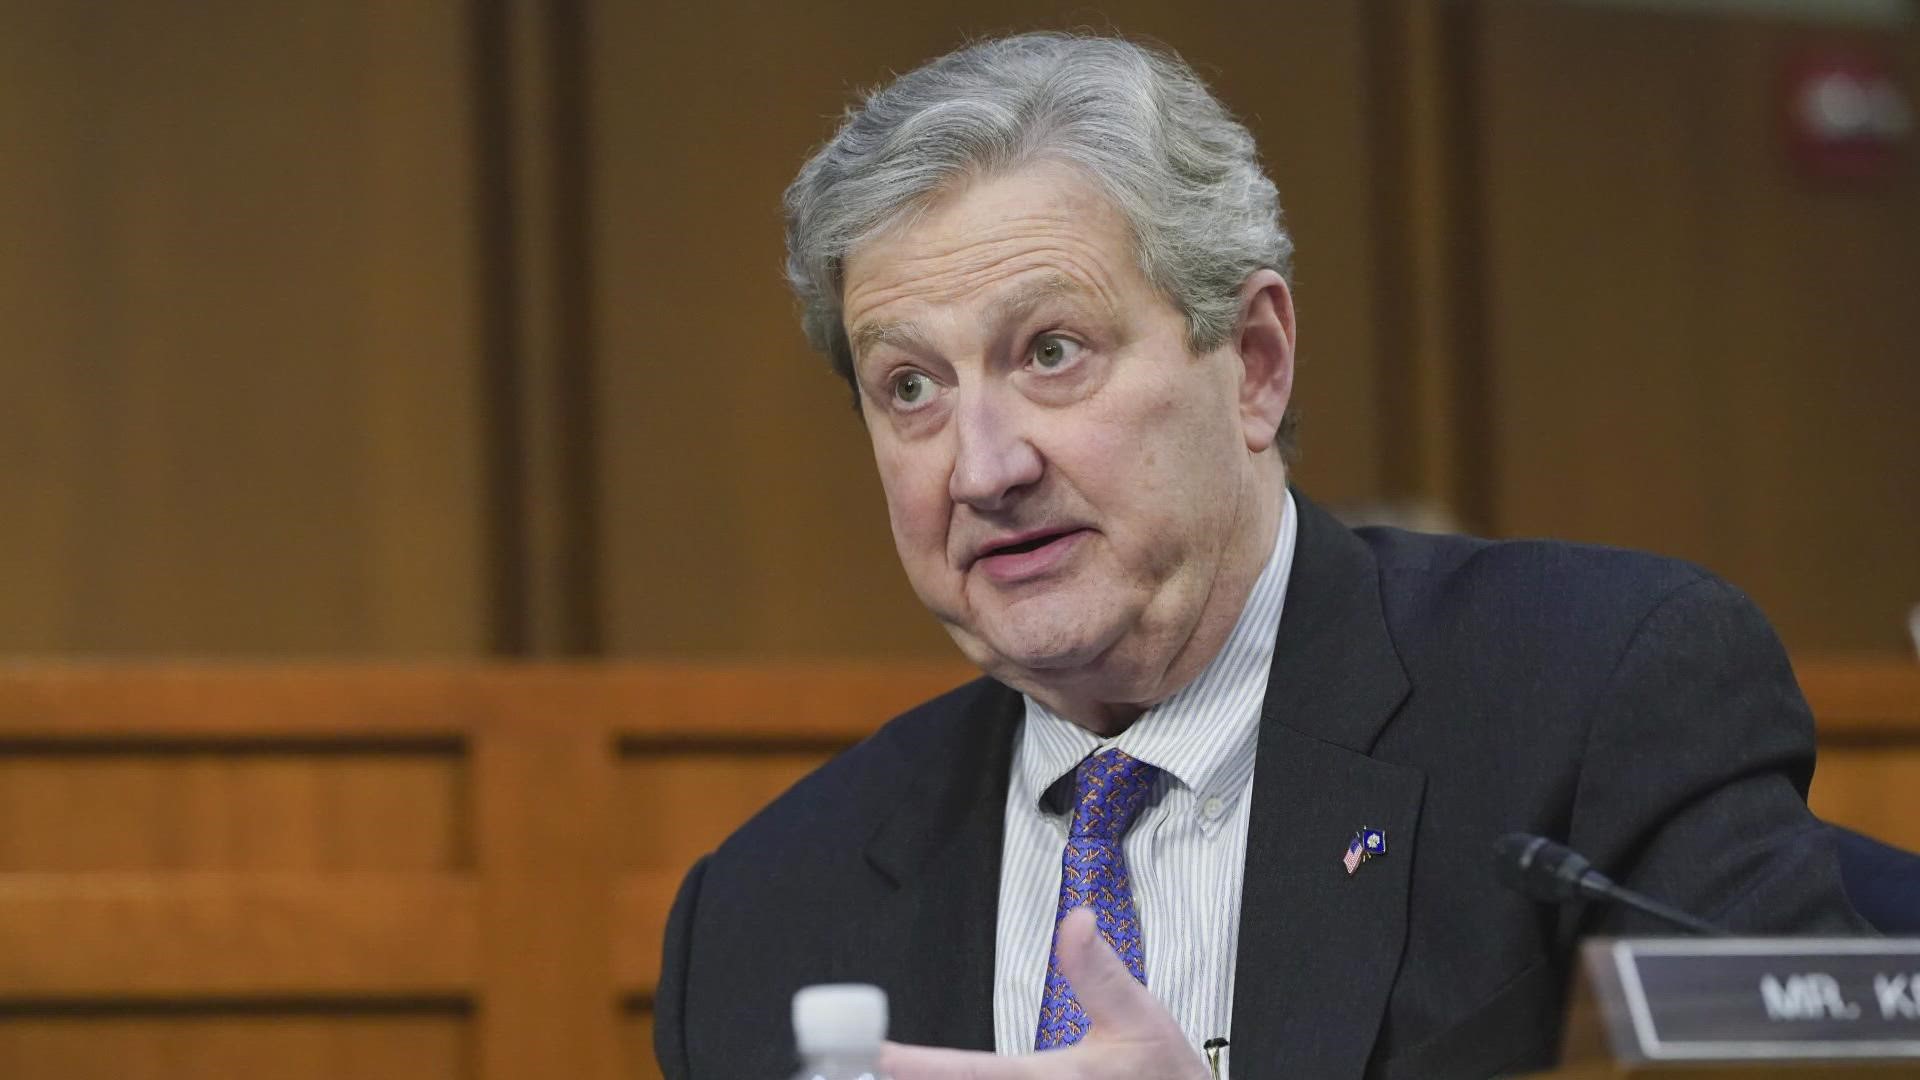 There are a lot of potential candidates now that the biggest name - U.S. Senator John Kennedy - has declined to run.